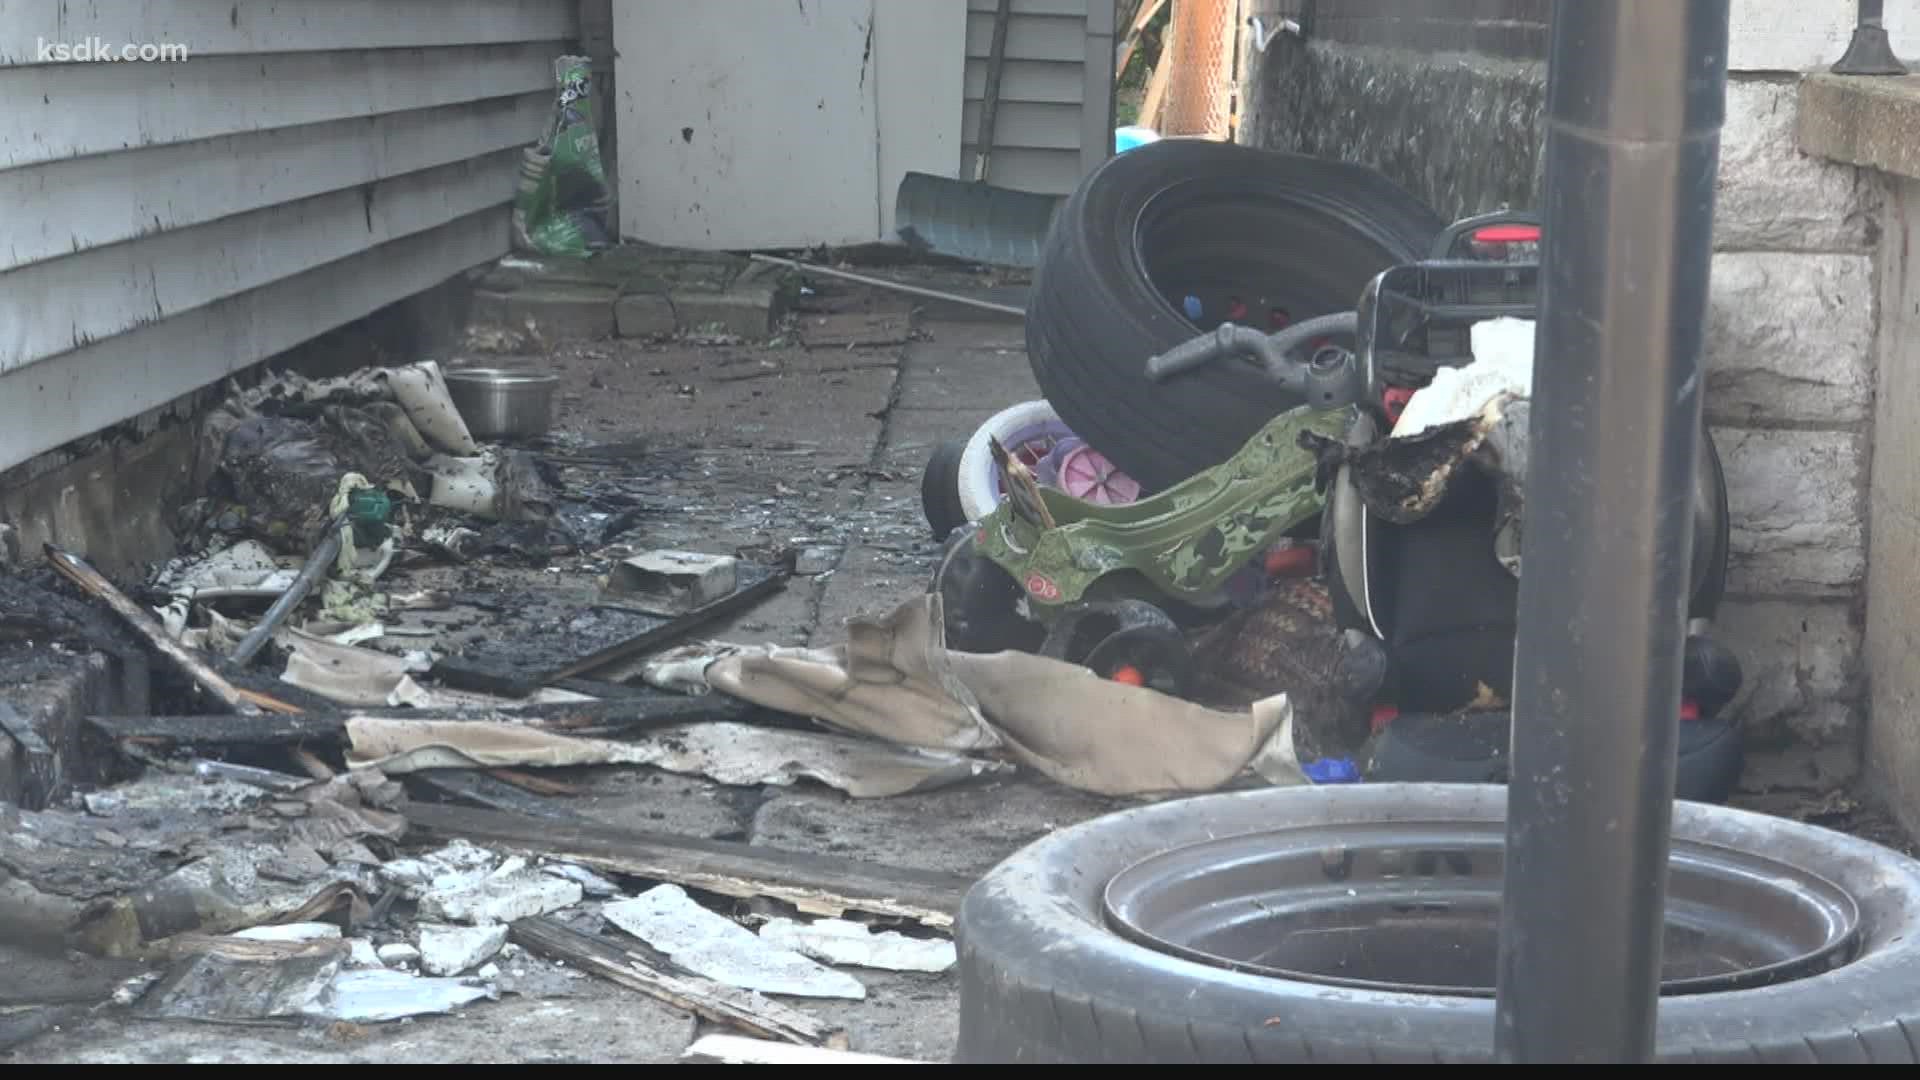 We're told one of the teenage girls ran back into the burning home to get one thing the family couldn't leave behind: her 8-year-old brother's ashes